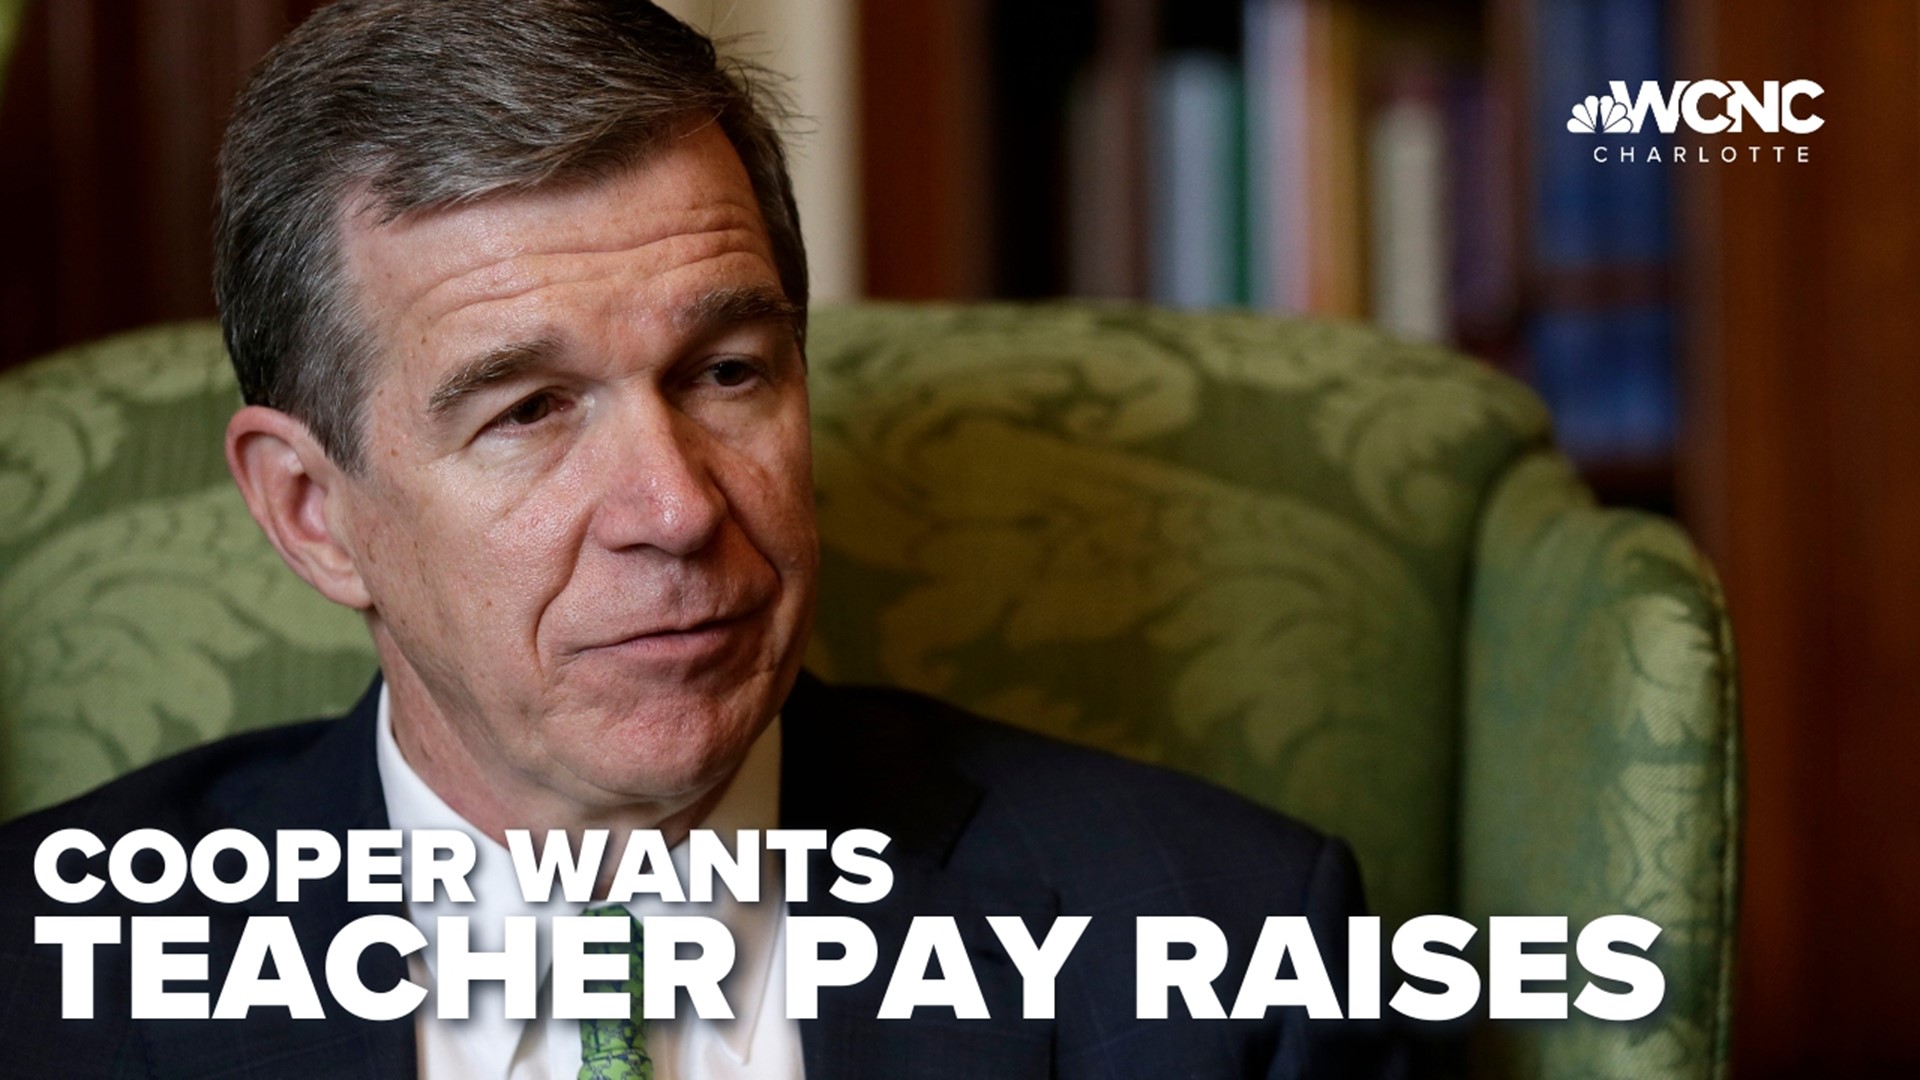 Governor Cooper says he eyeing big raises for teachers and massive investments in school safety.